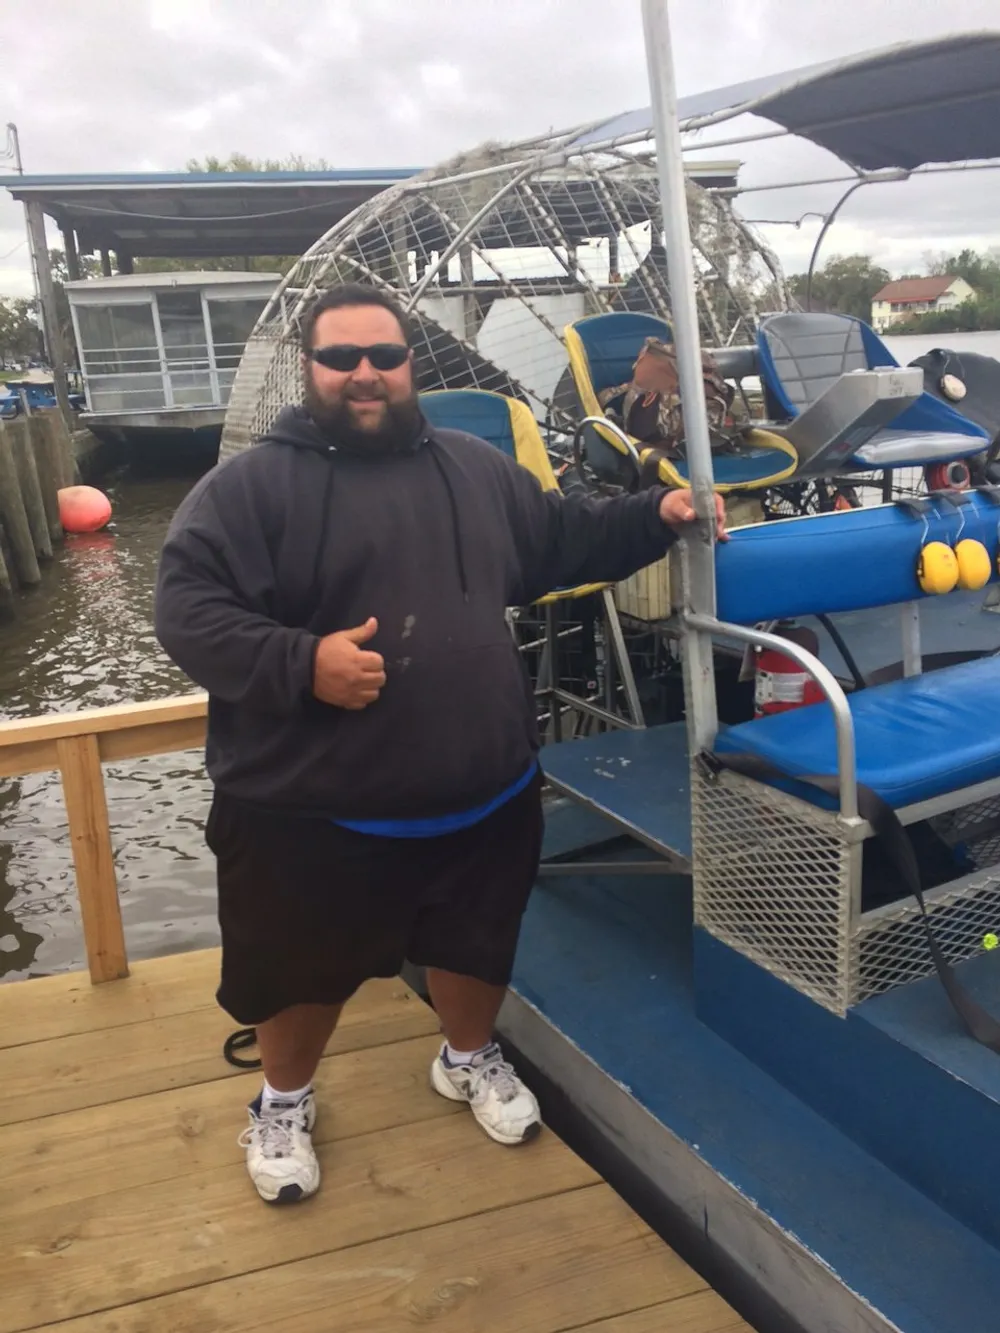 A person is giving a thumbs-up while standing next to an airboat at a dock